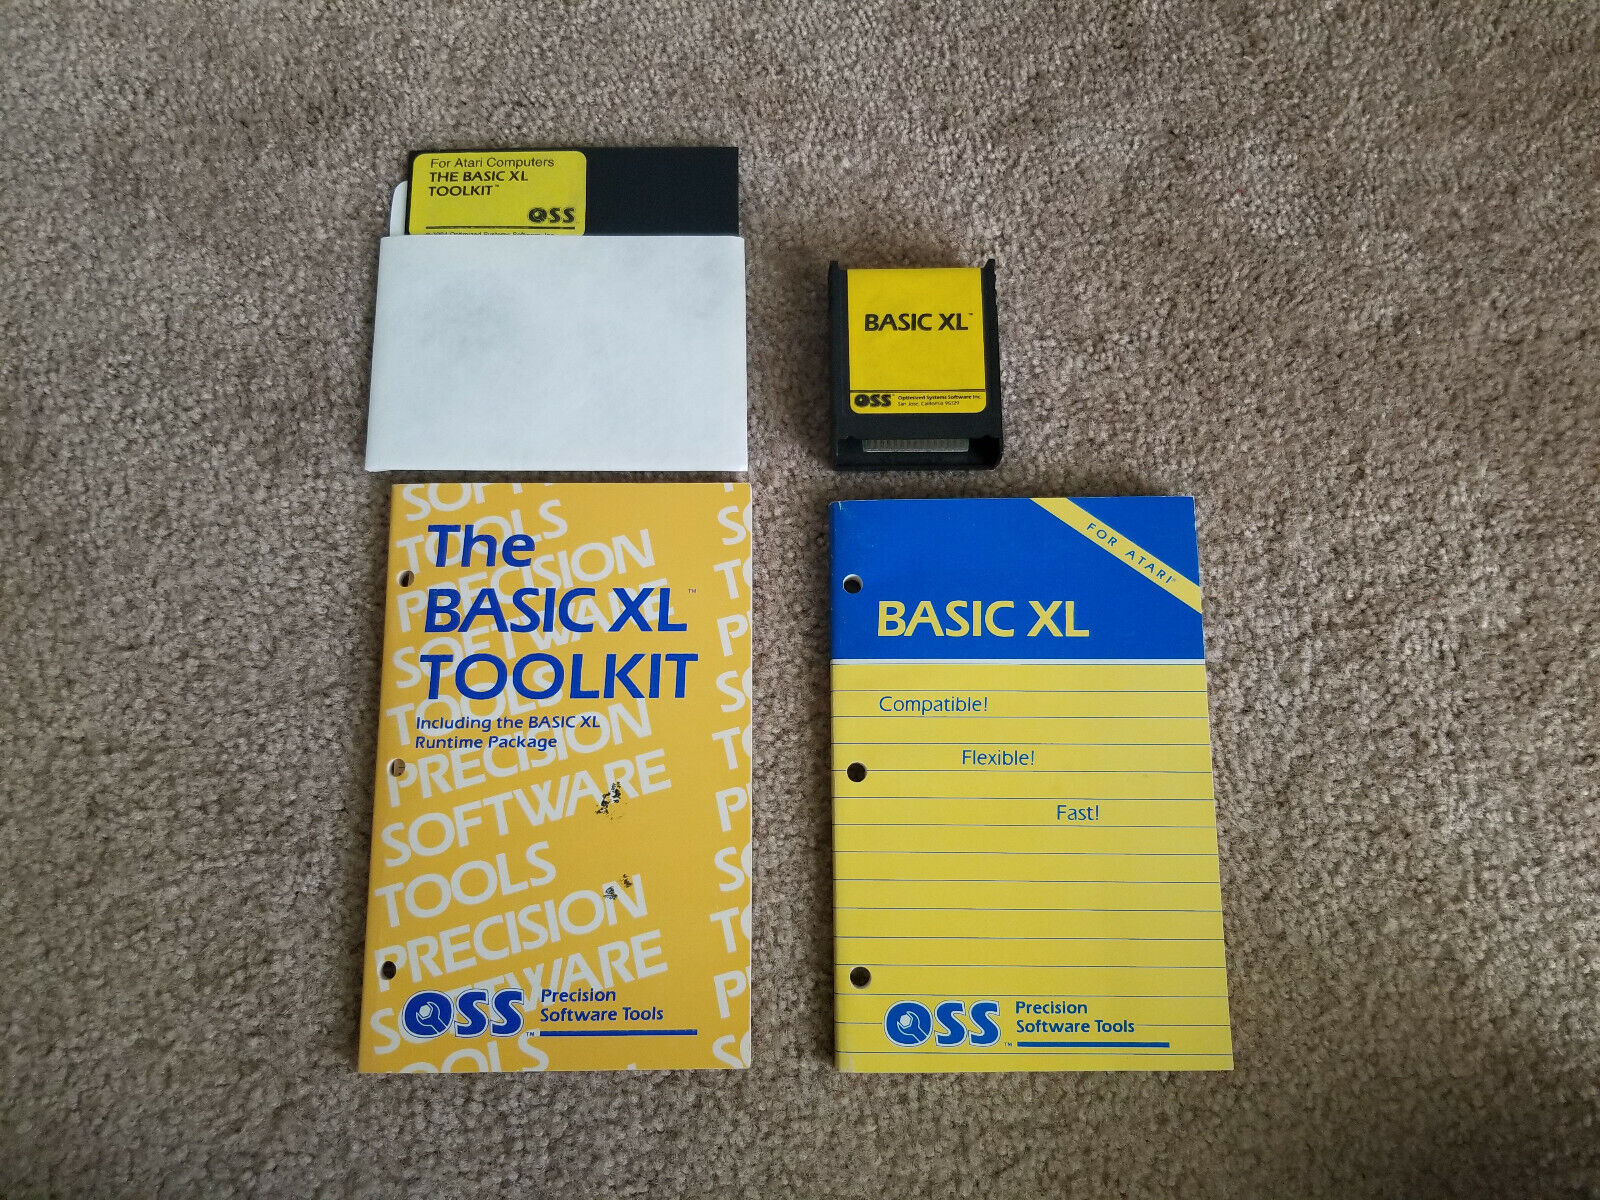 Atari 400/800/XL/XE Basic XL by OSS Complete with Manuals, 1 Cart, and 1 Floppy